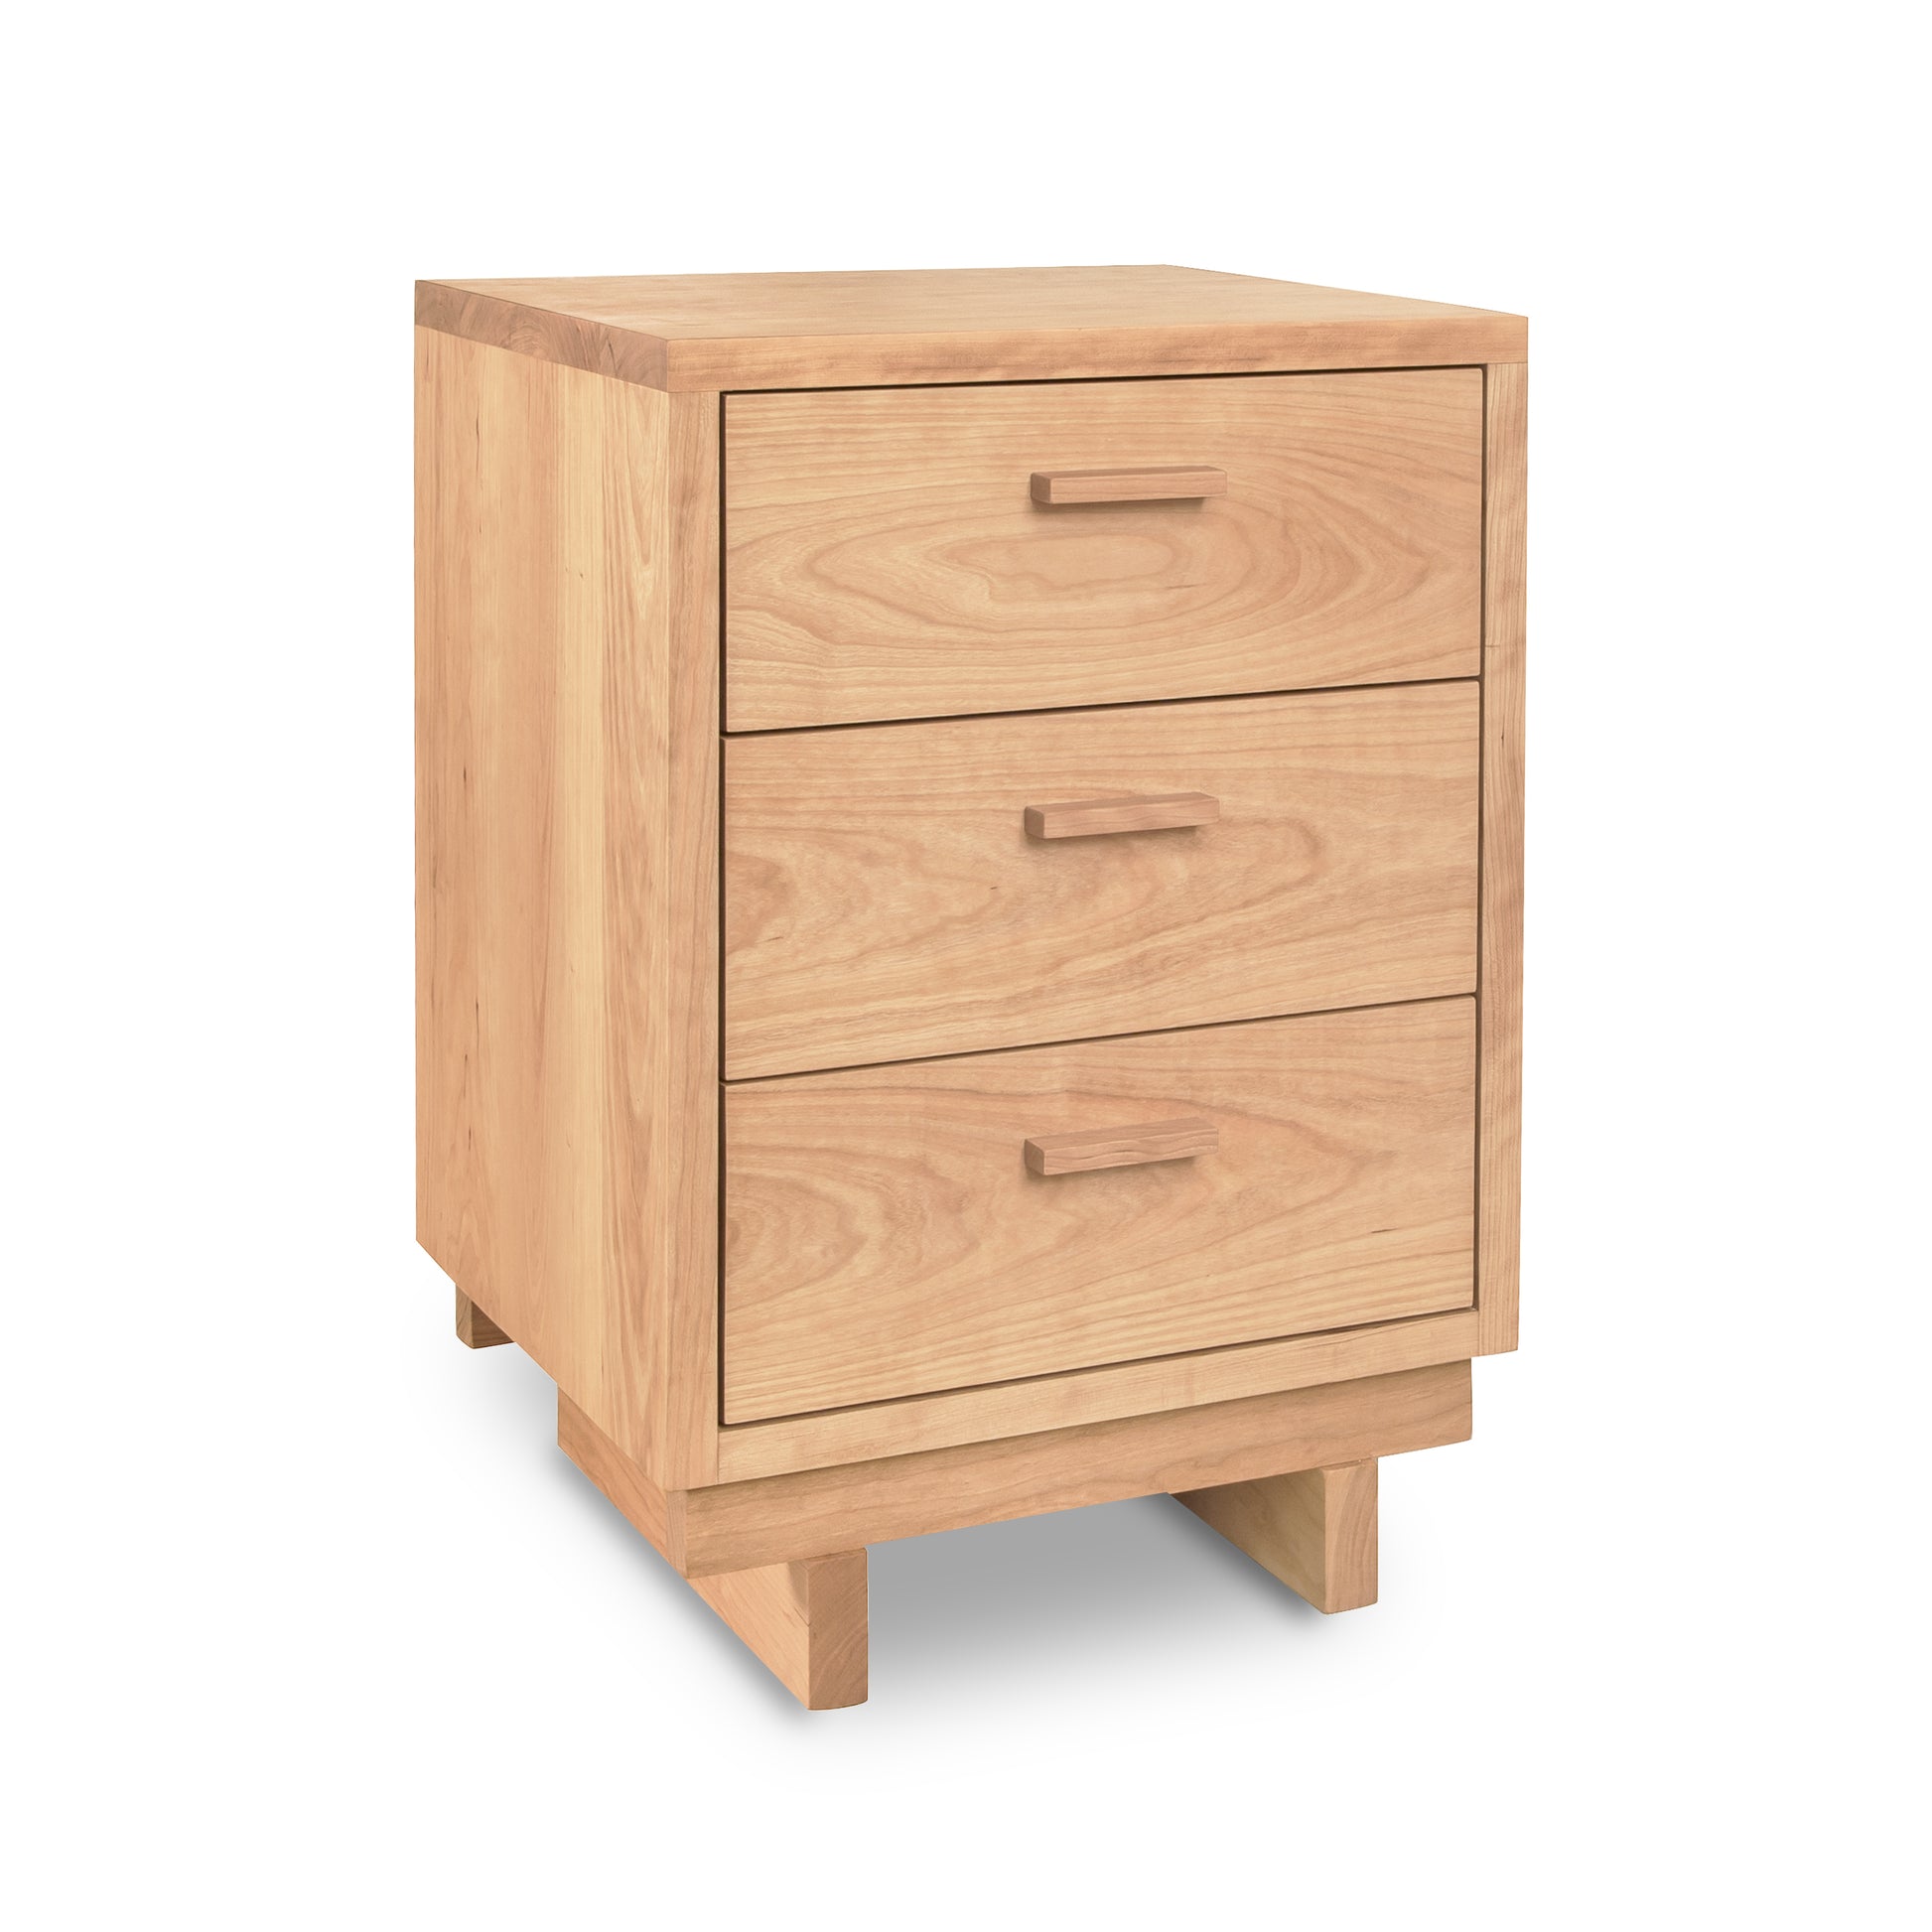 A Loft 3-Drawer Nightstand by Vermont Furniture Designs, a solid wood construction nightstand, isolated on a white background.